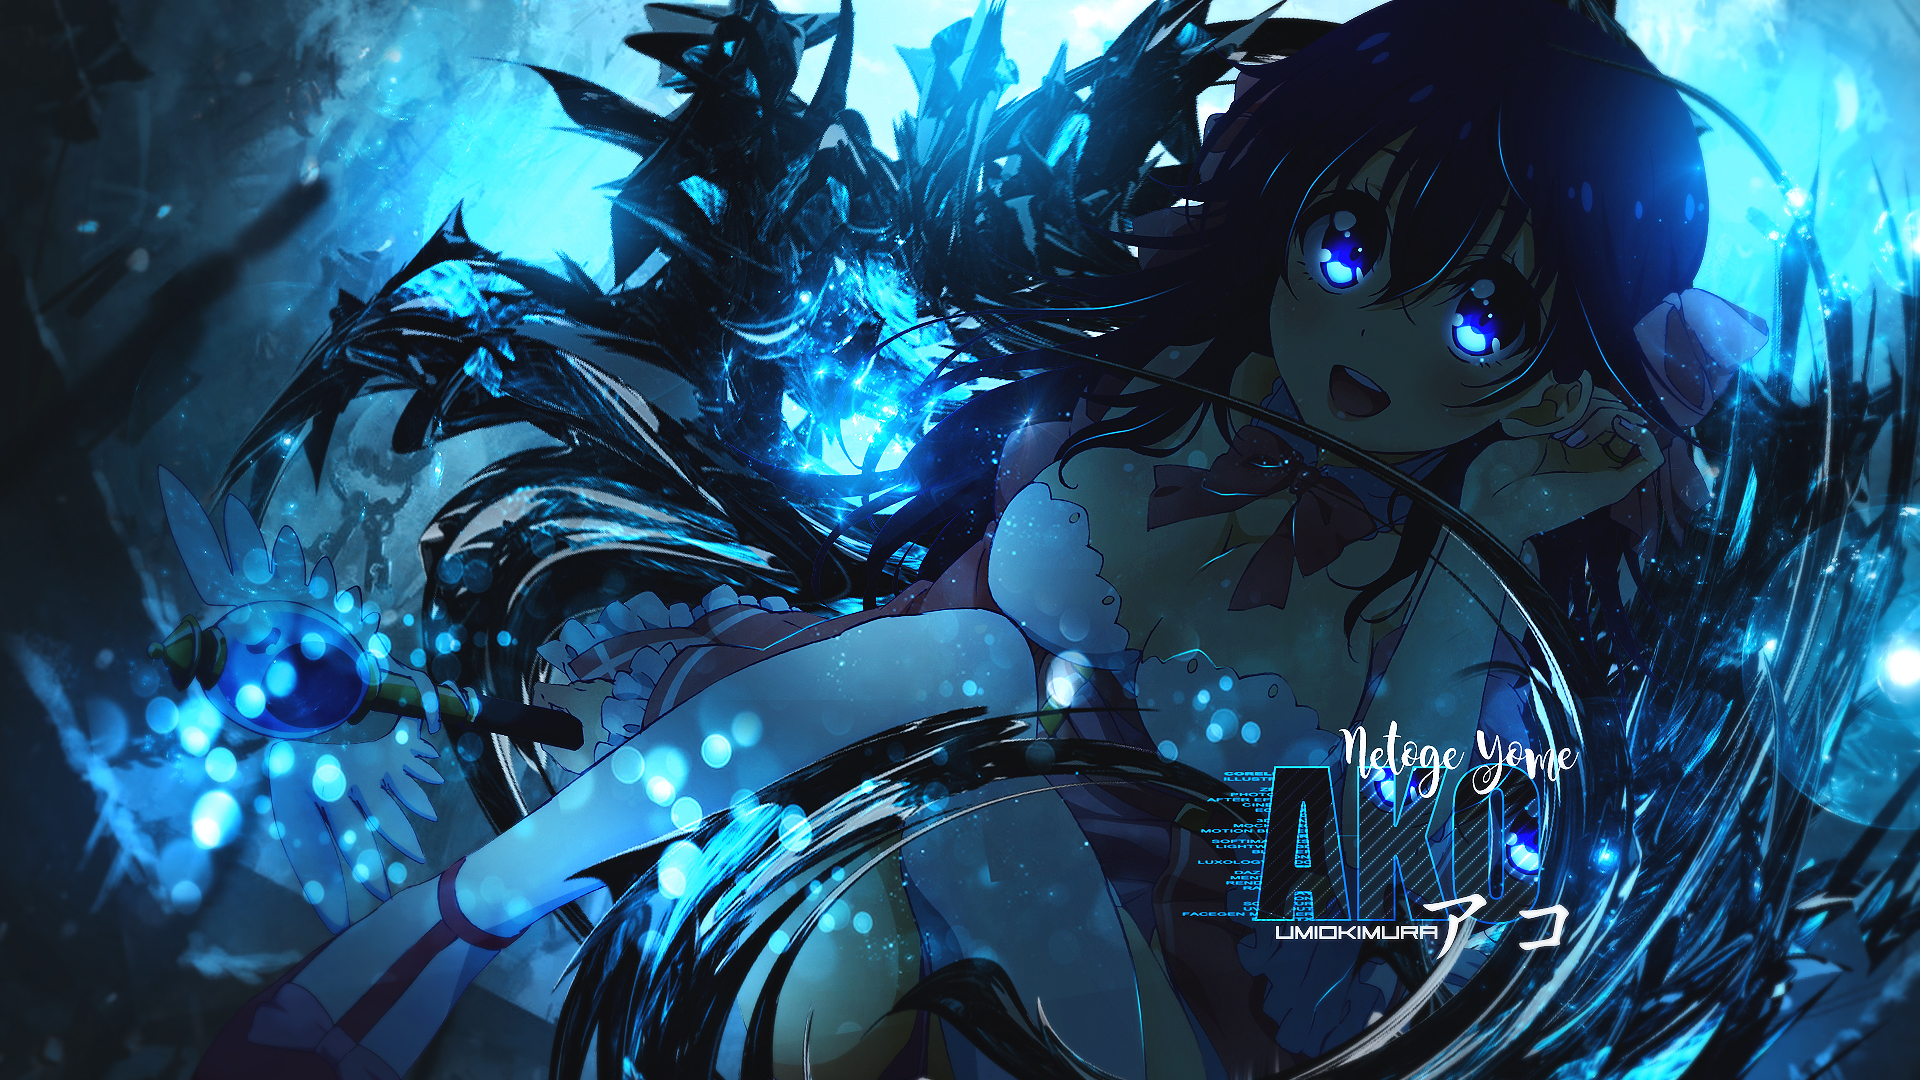 Anime And you thought there is never a girl online? HD Wallpaper | Background Image